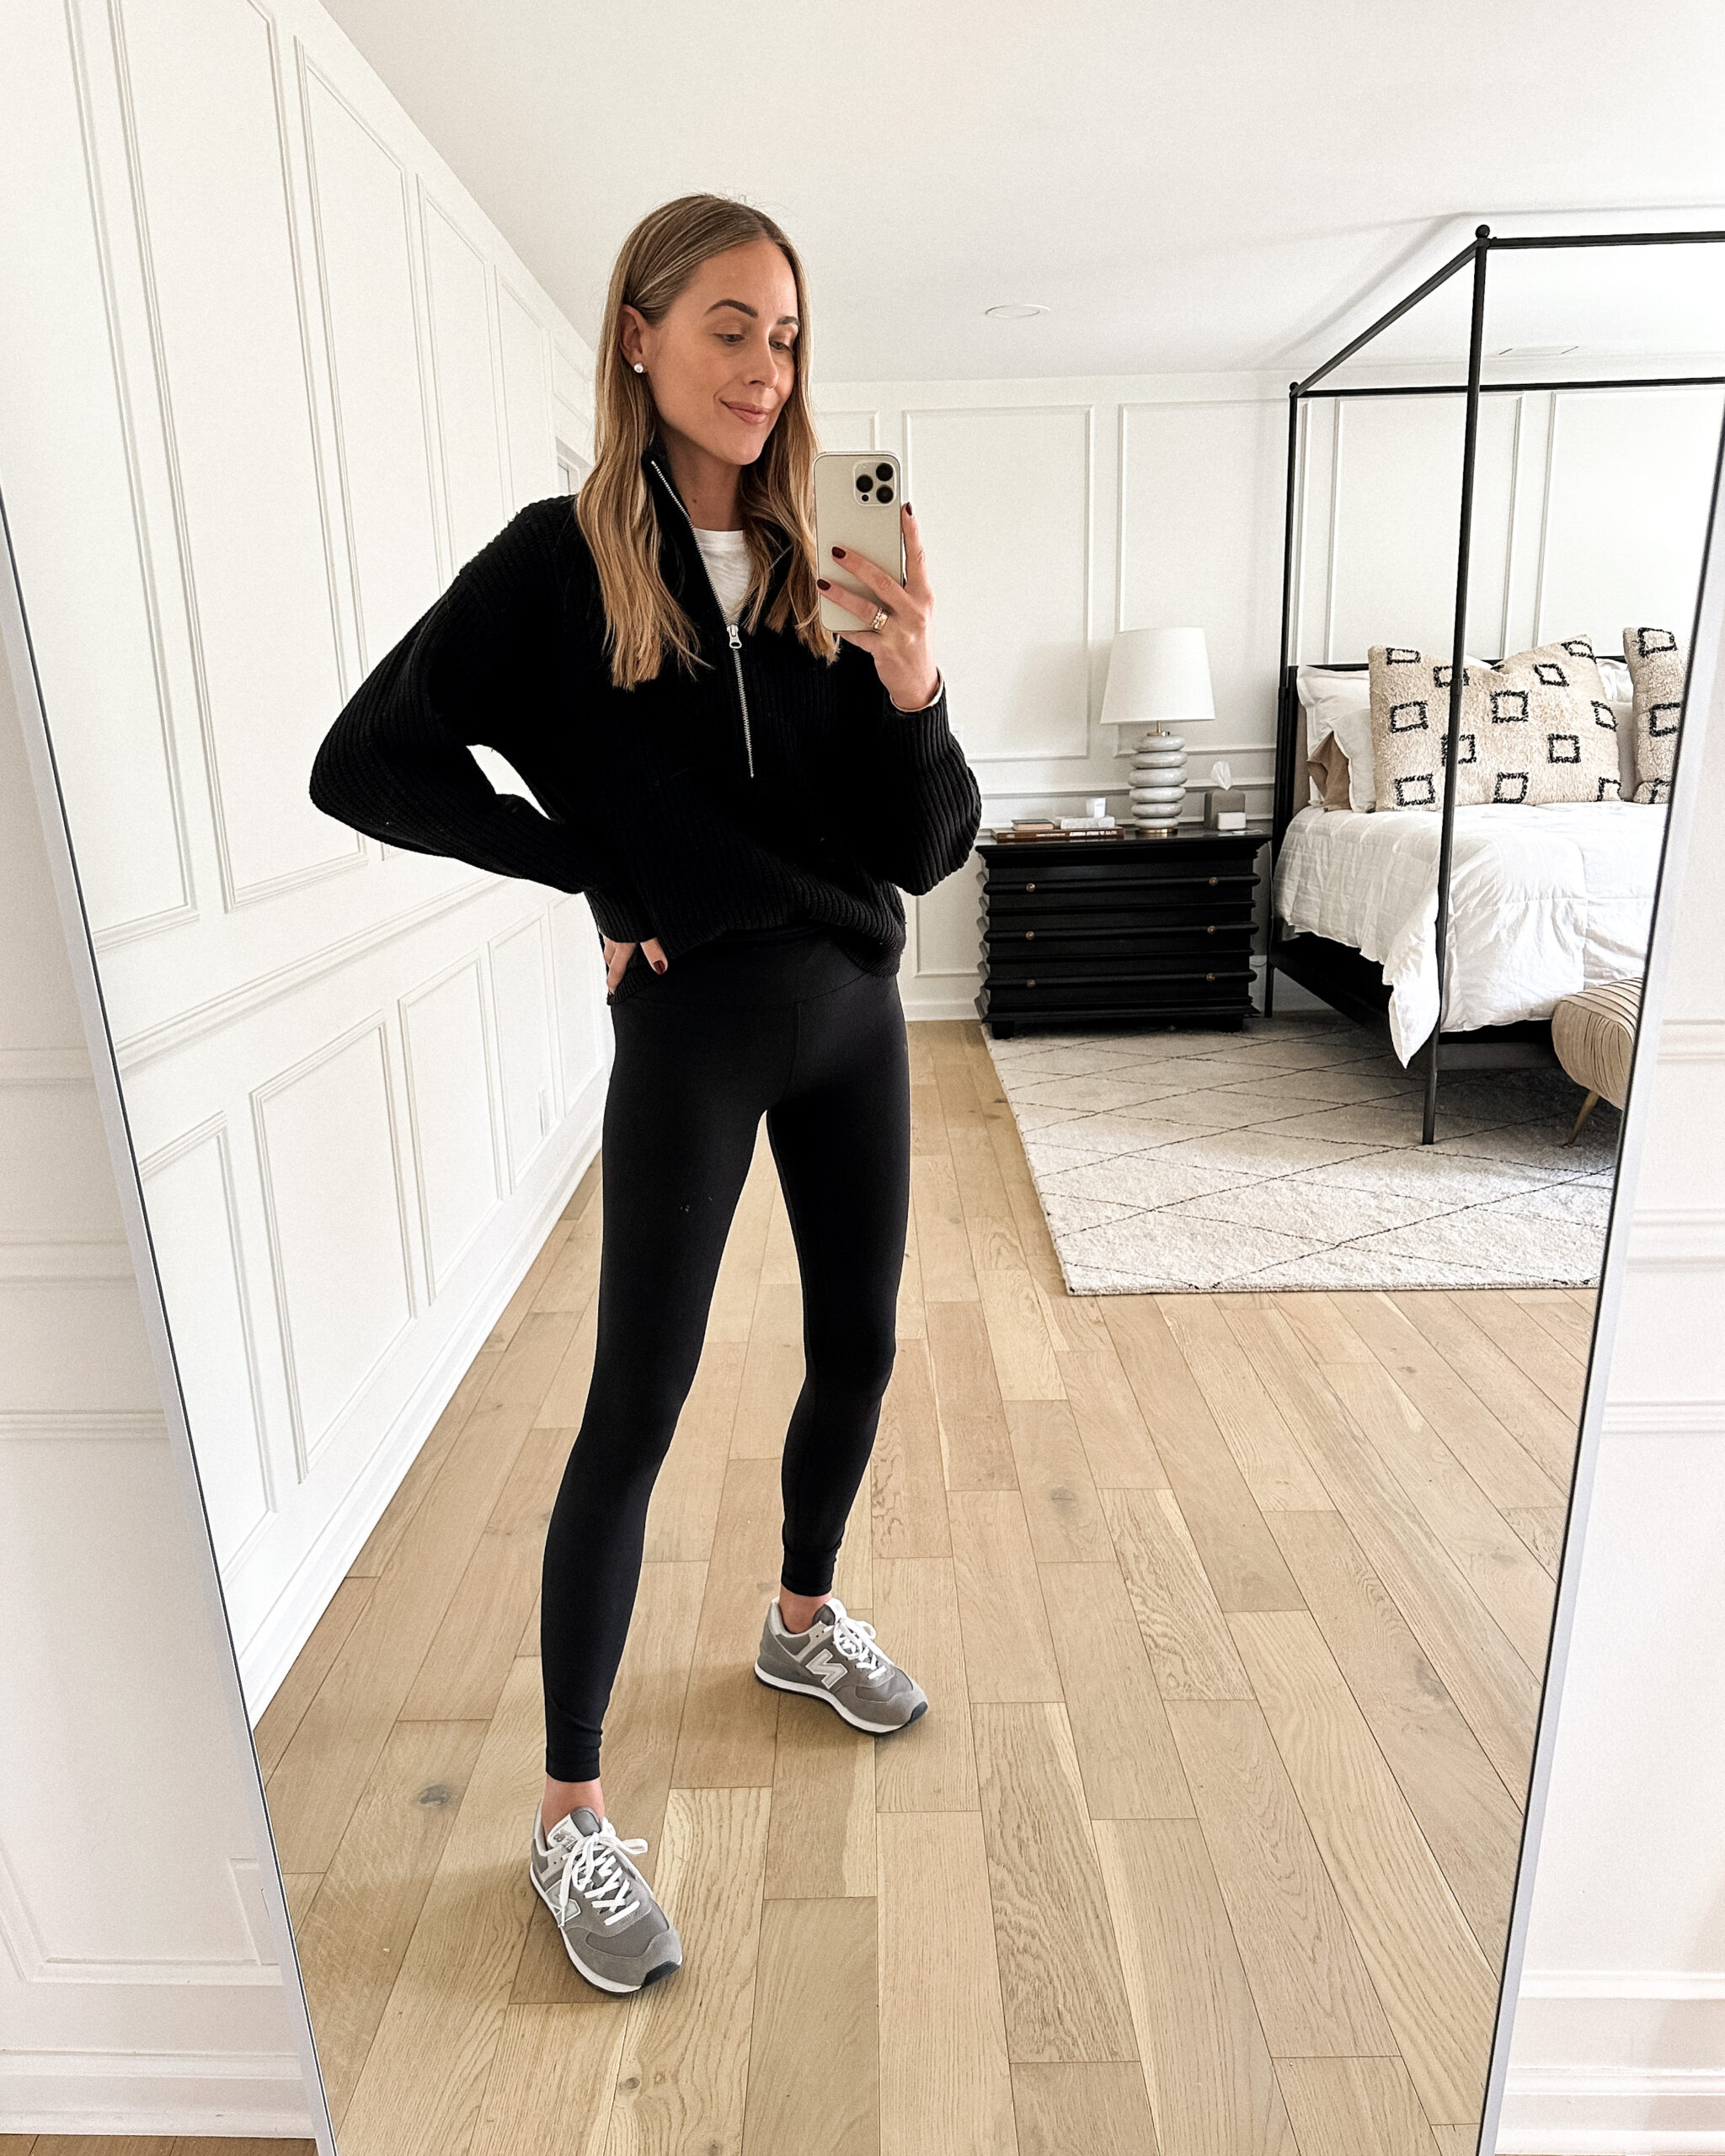 Fashion Jackson Wearing Everlane Black Zip Sweater Black Leggings New Balance 574 Sneakers Casual Fall Weekend Athleisure Outfit